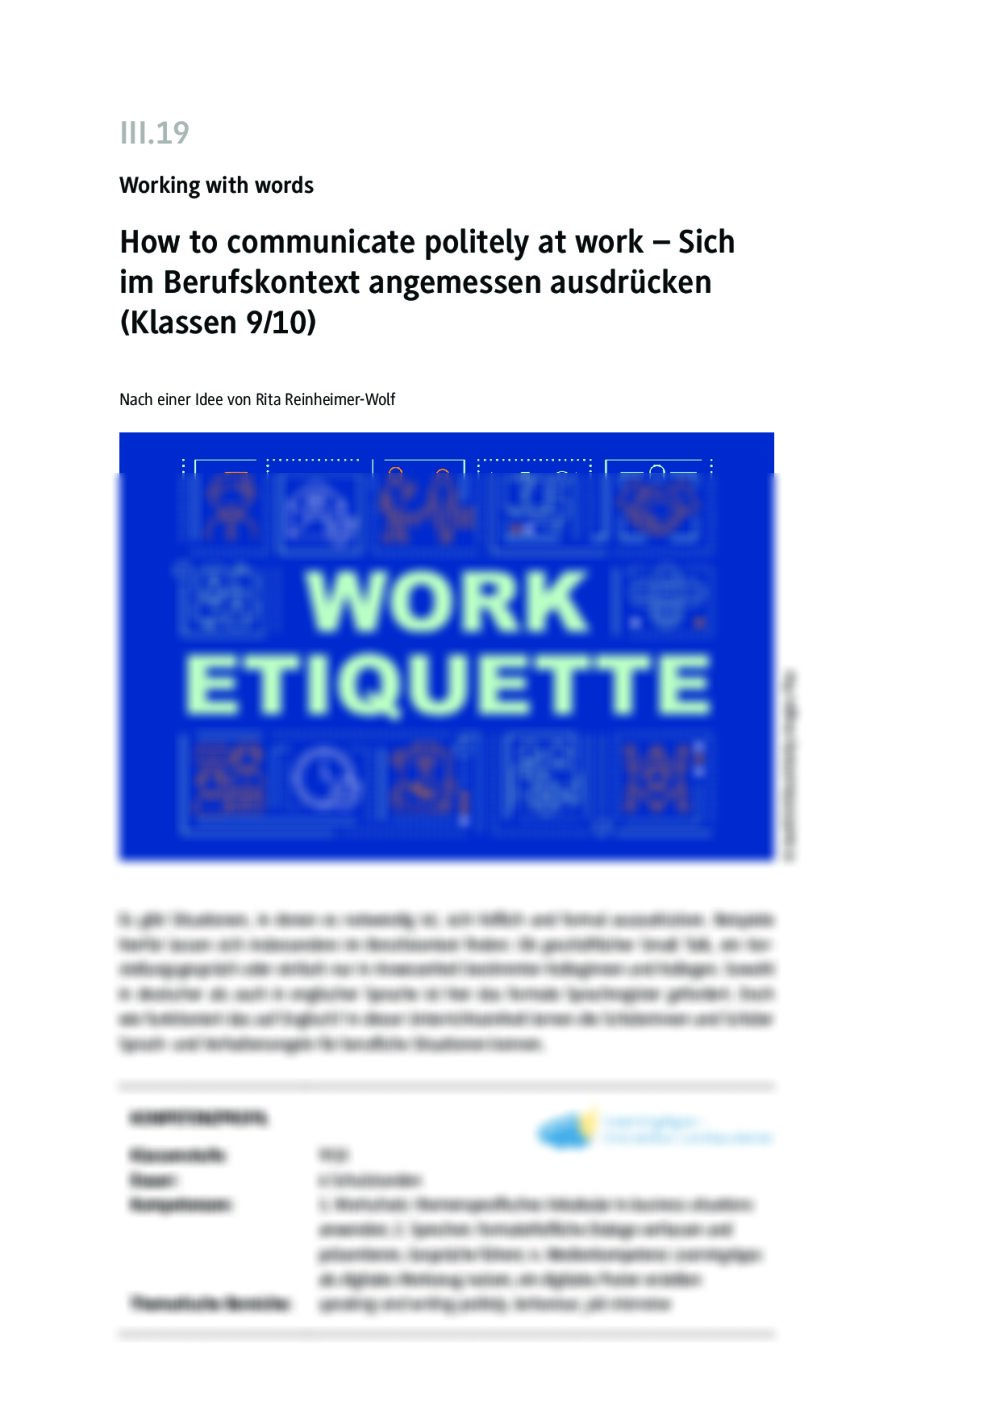 How to communicate politely at work - Seite 1